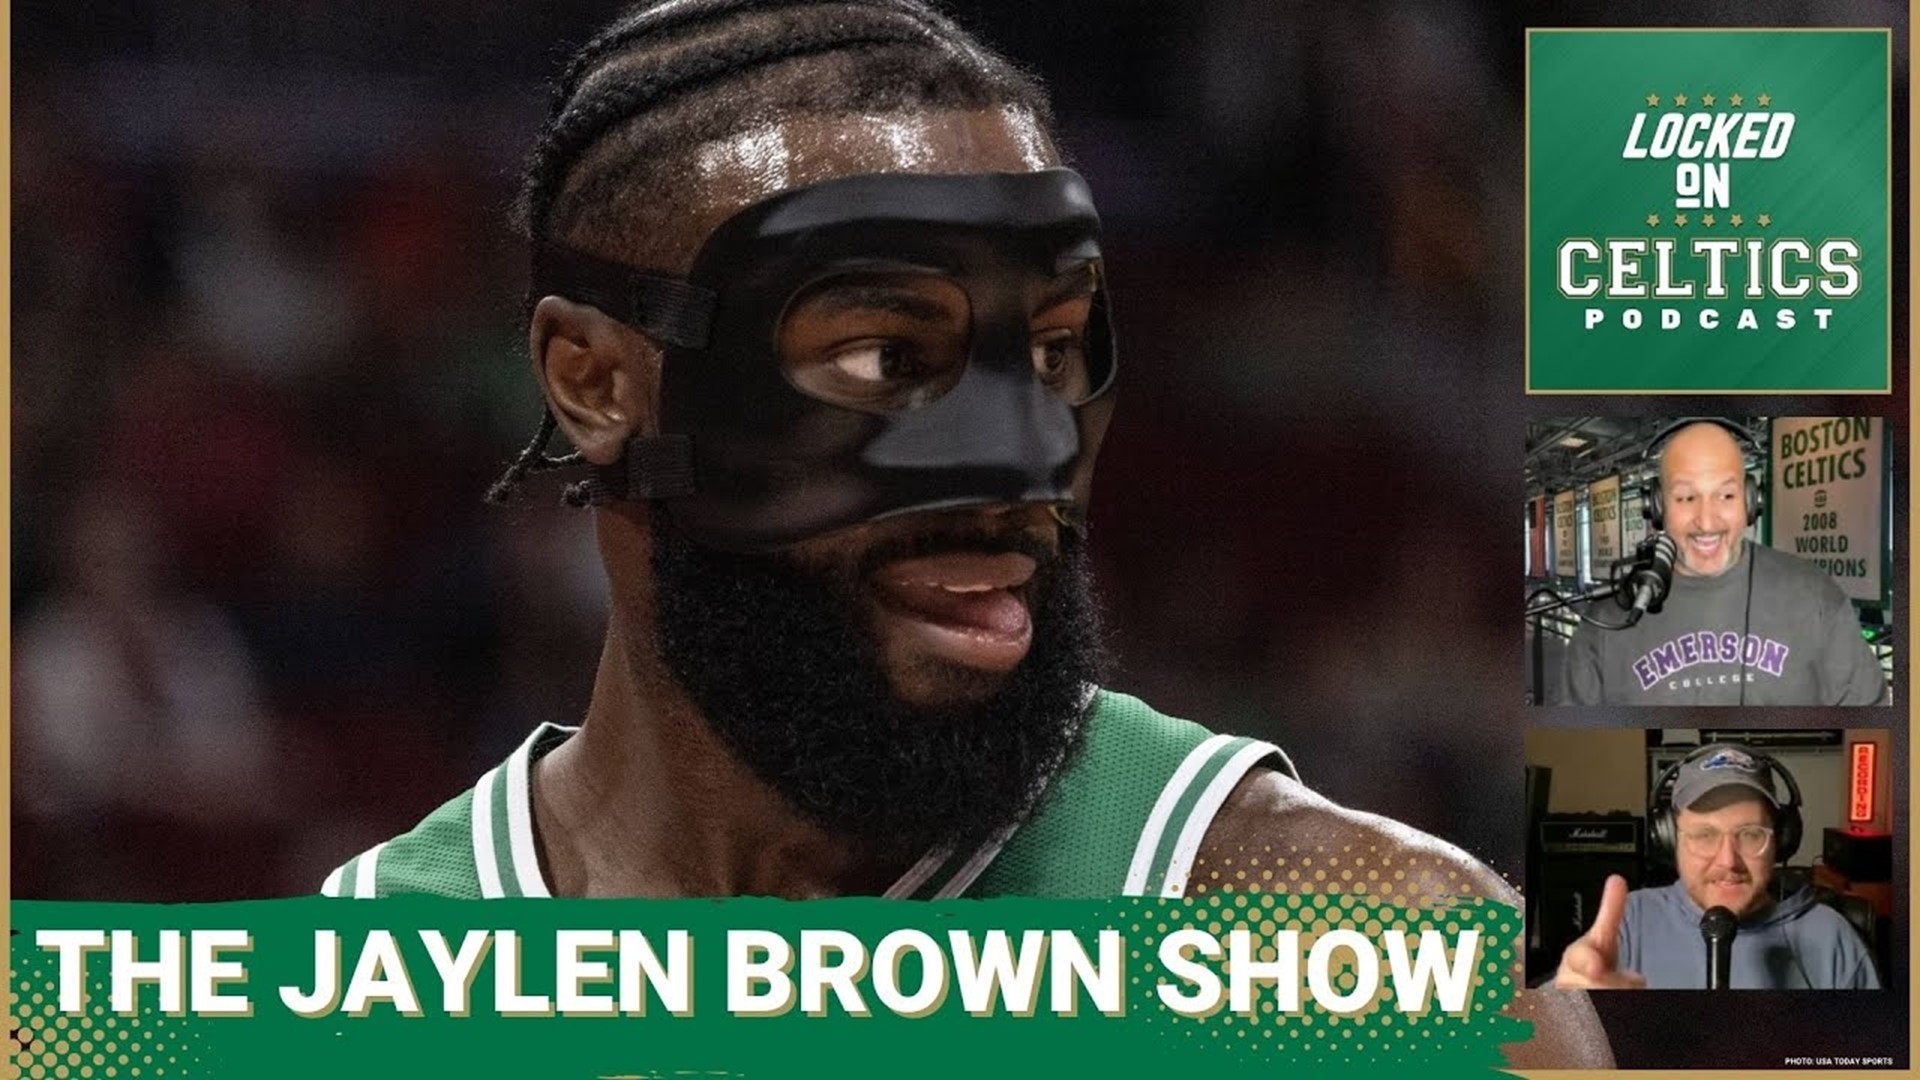 The Jaylen Brown show: how he's becoming a stronger Boston Celtics leader